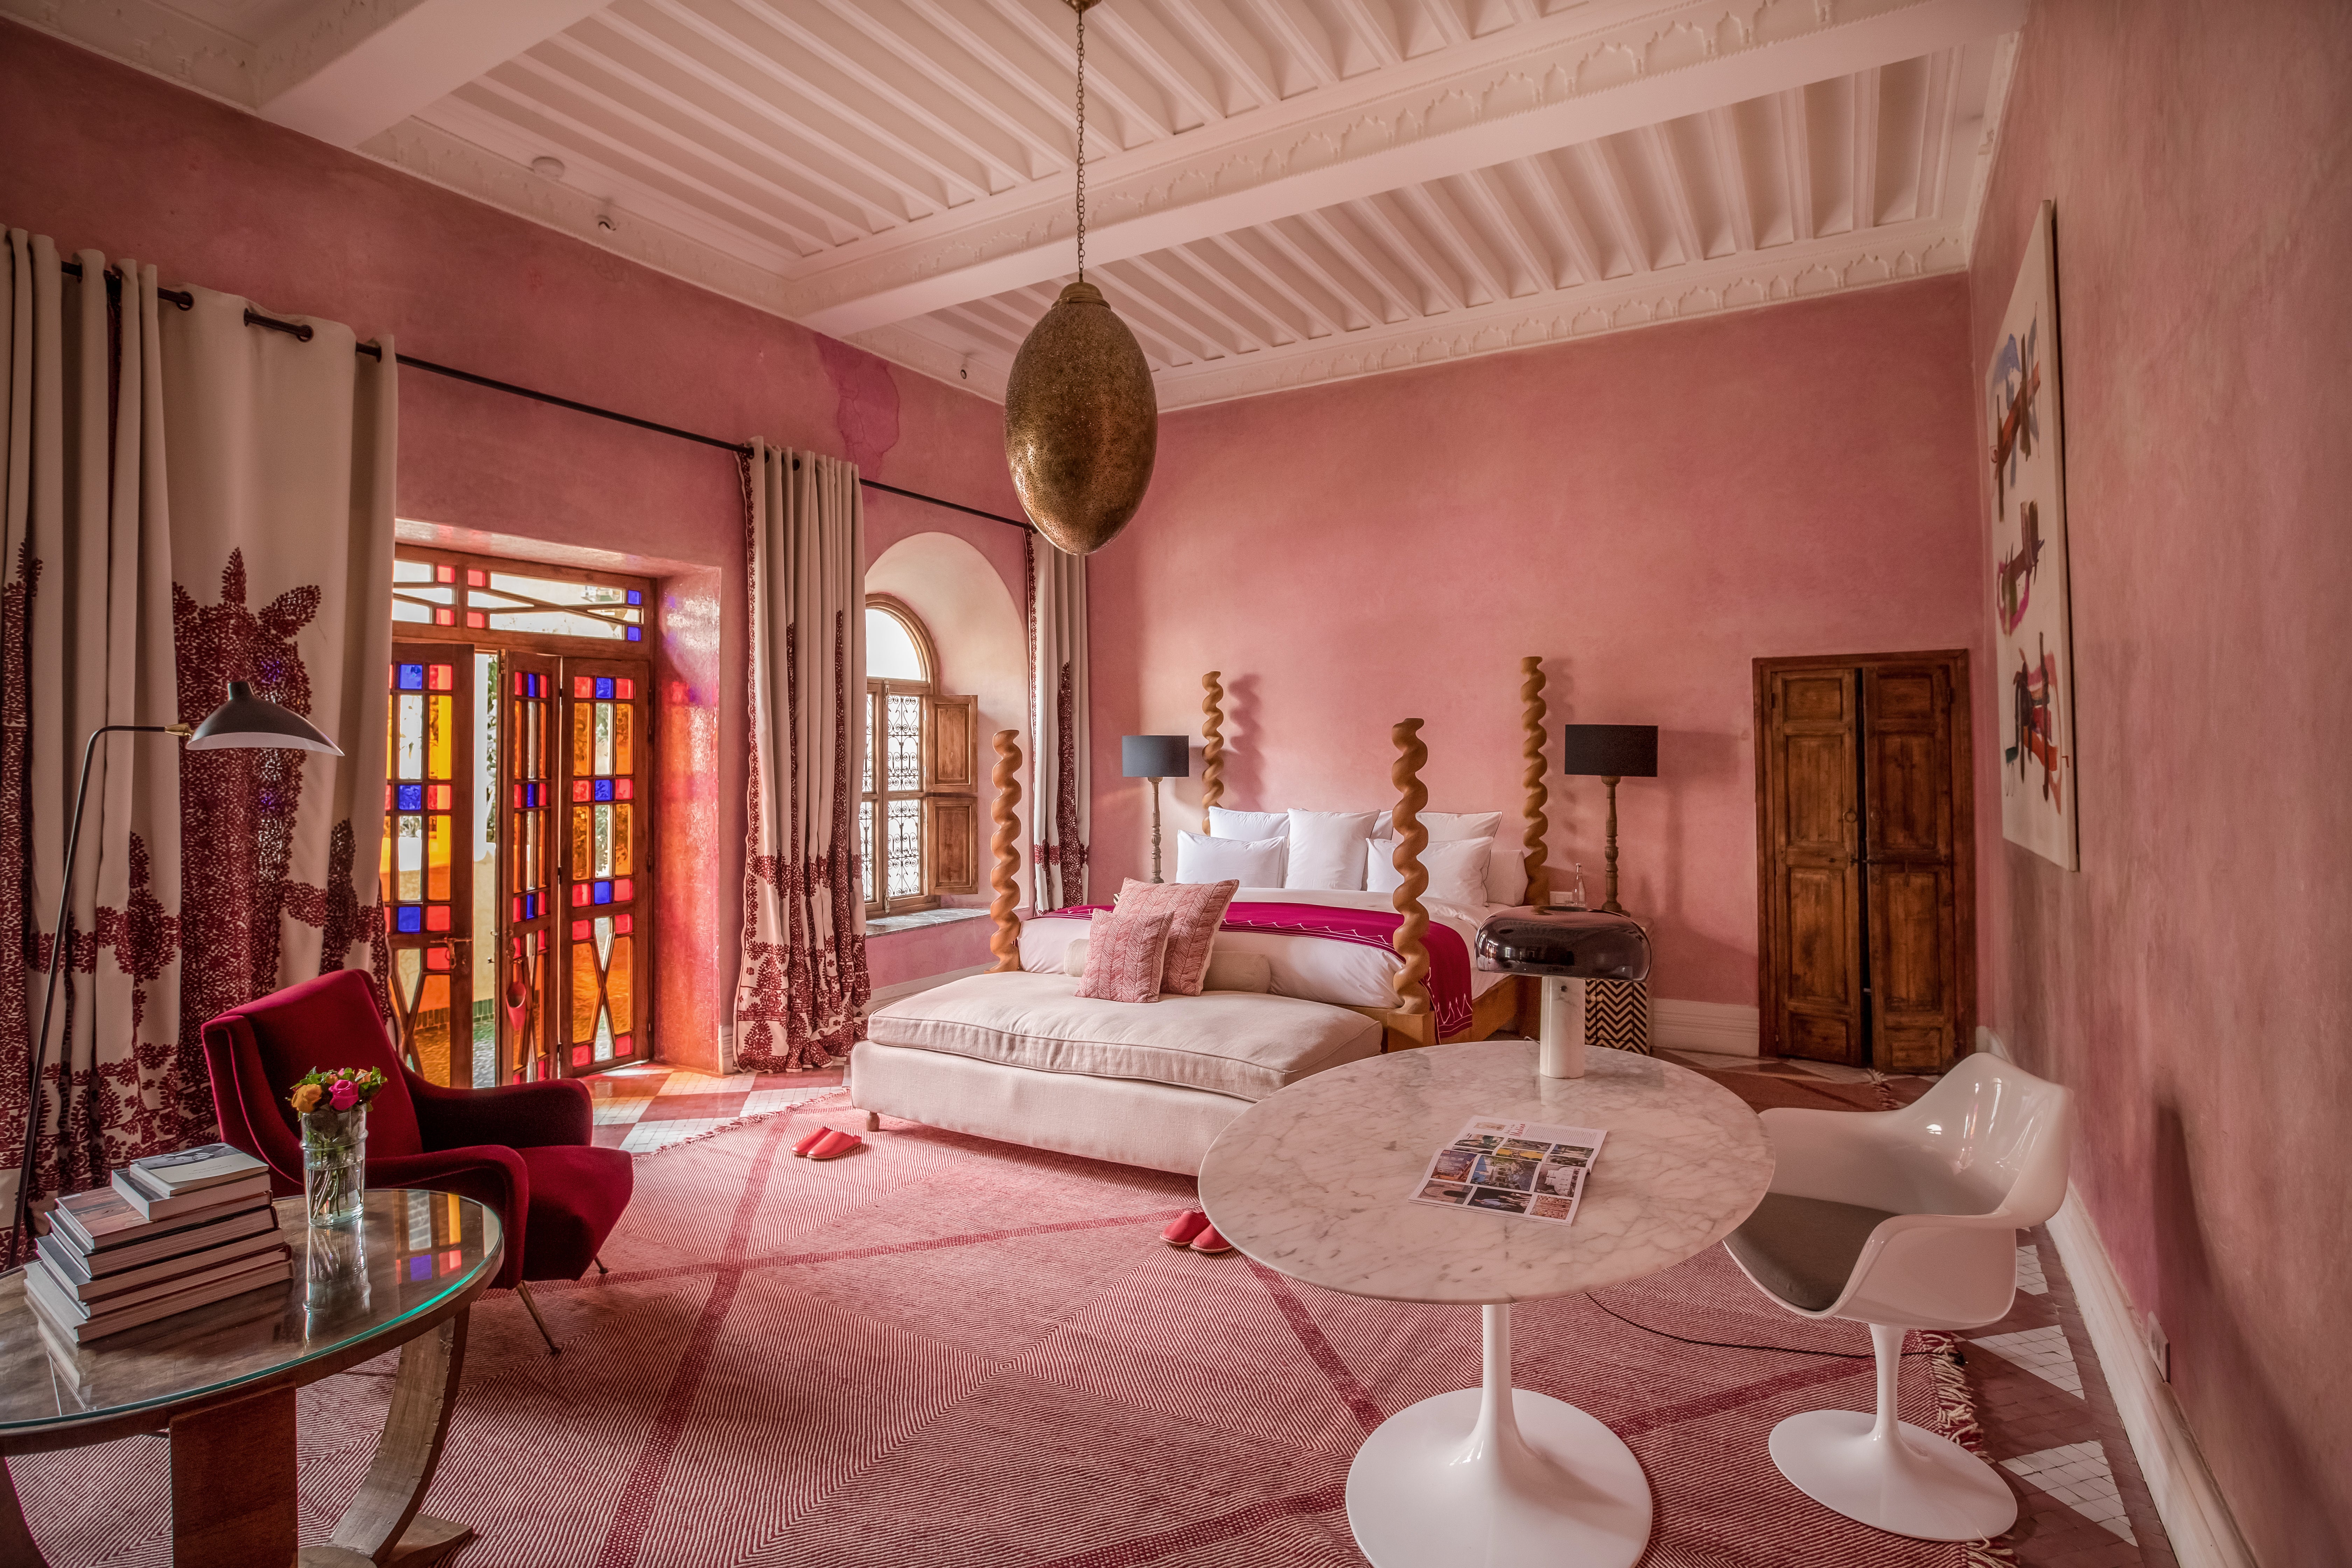 El Fenn’s rooms are a paradise of pink delights